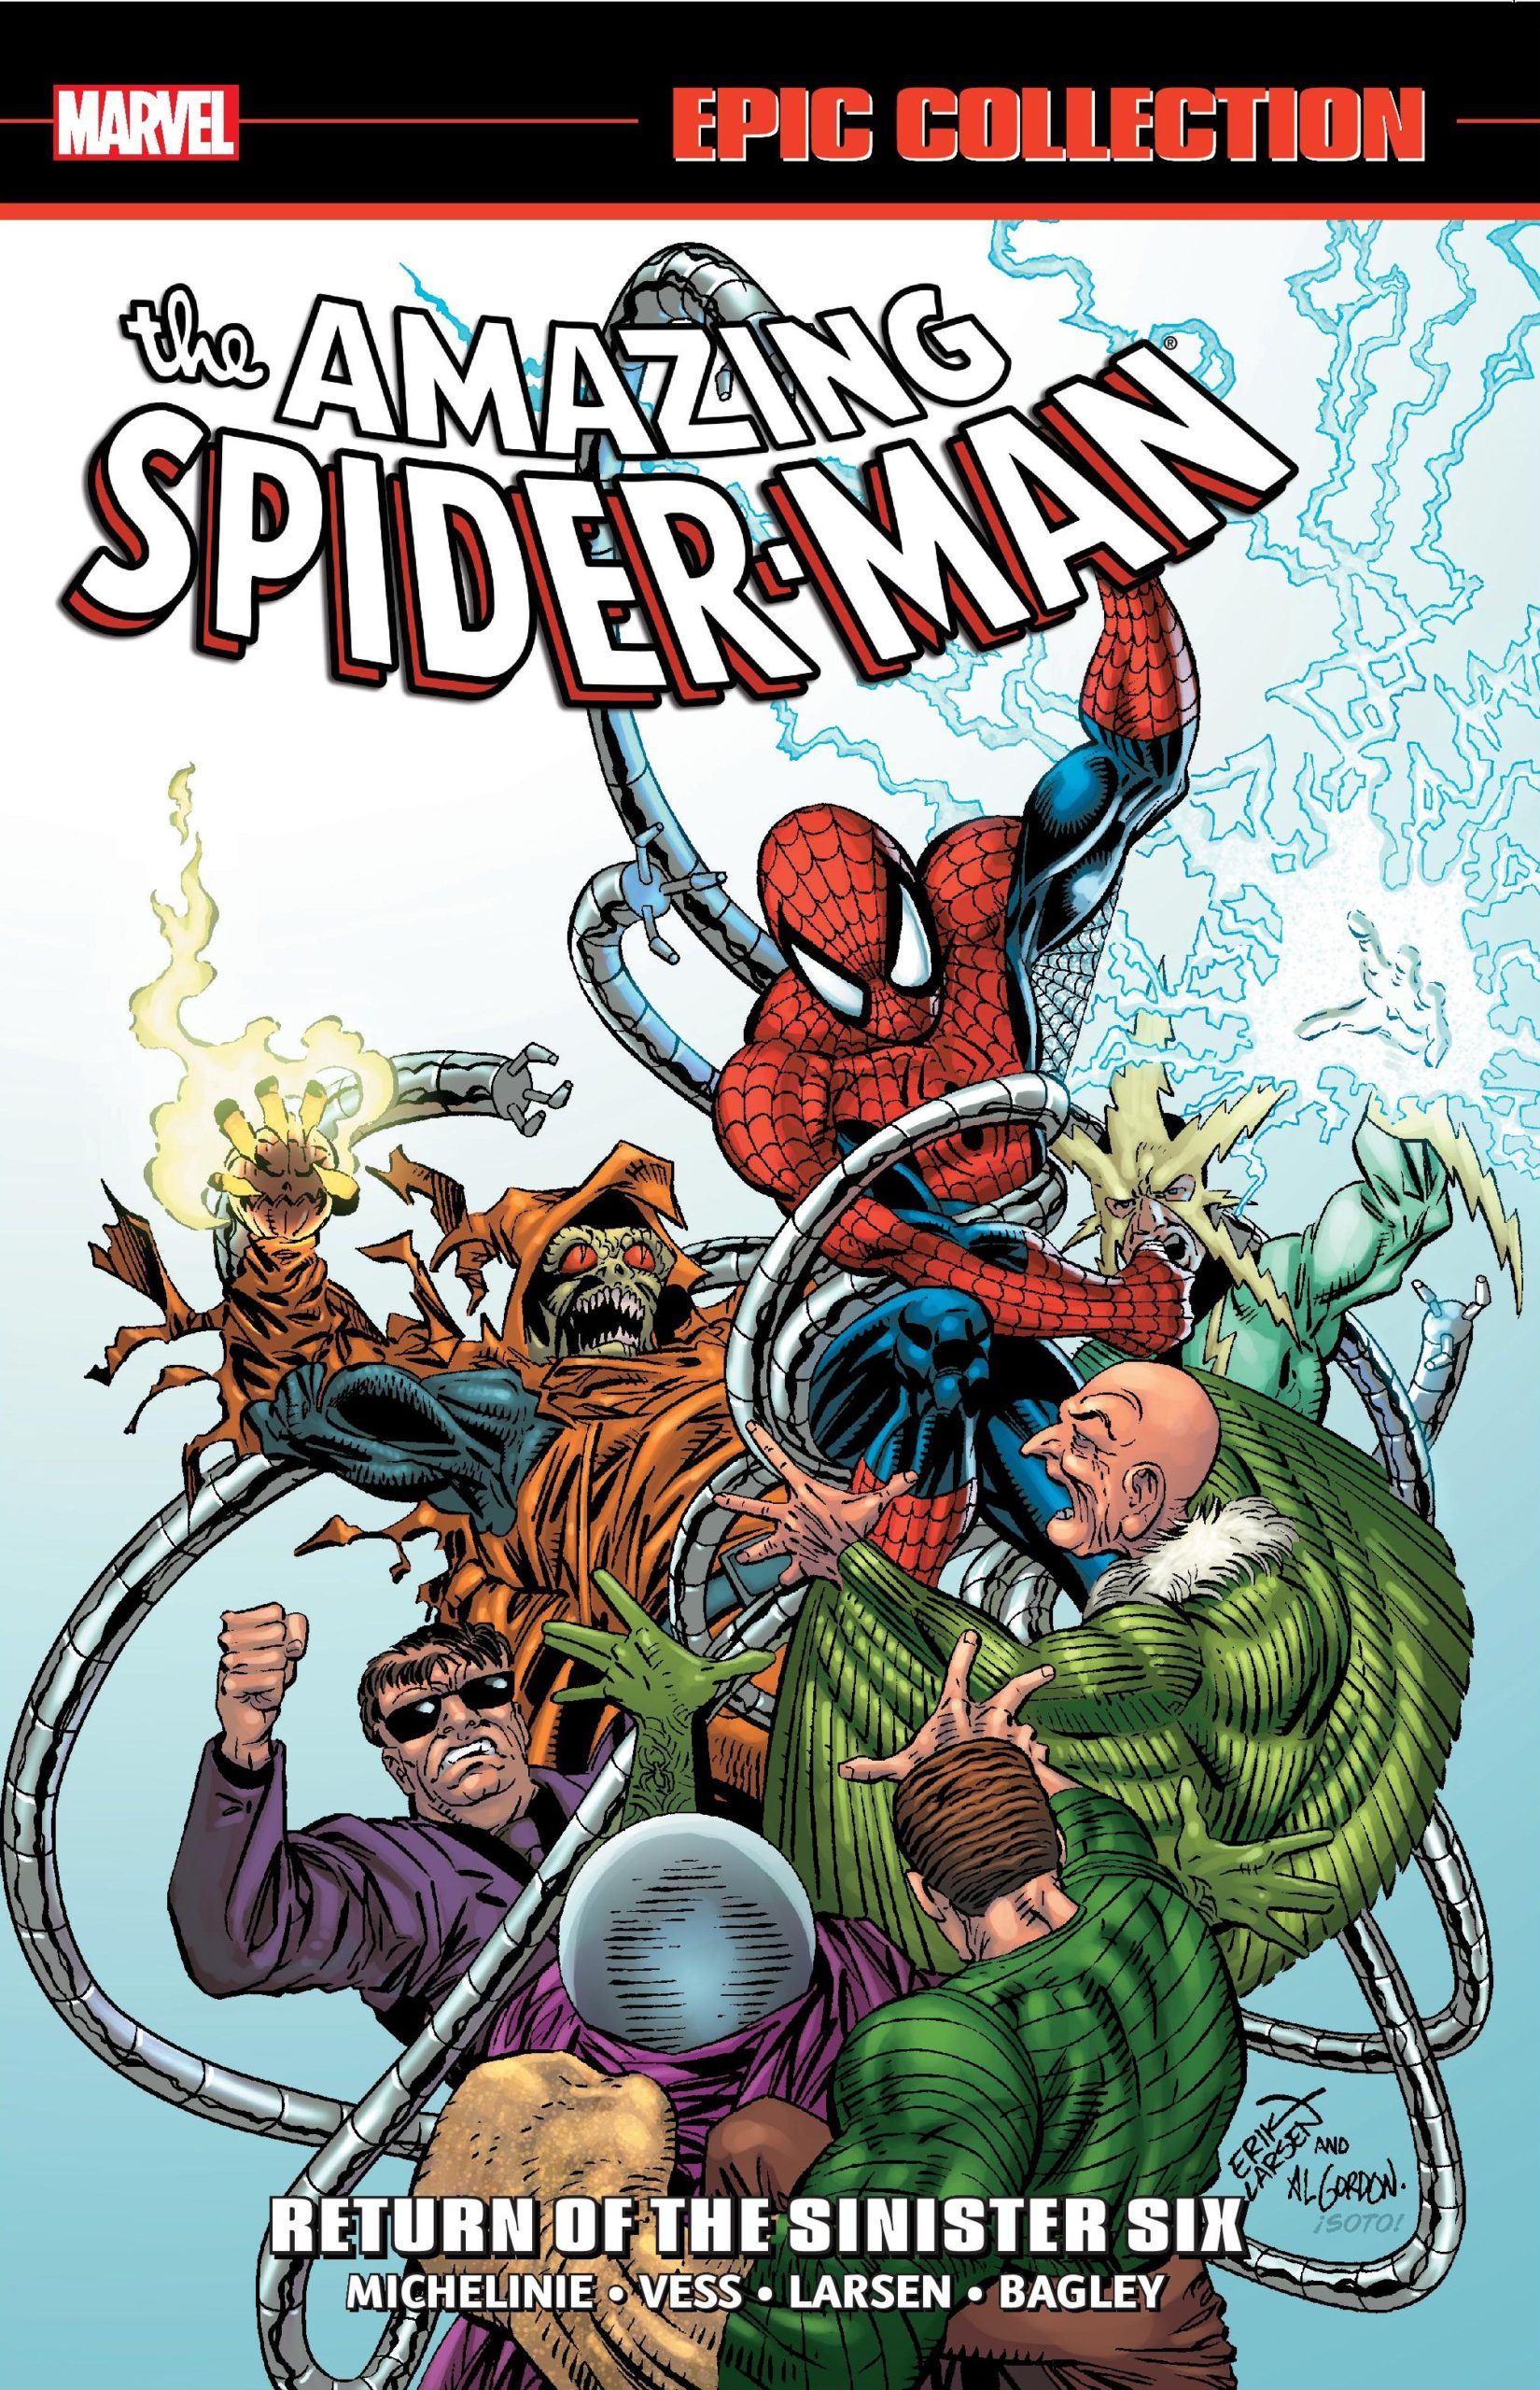 AMAZING SPIDER-MAN EPIC COLLECTION- RETURN OF THE SINISTER SIX TPB (Trade Paperback)